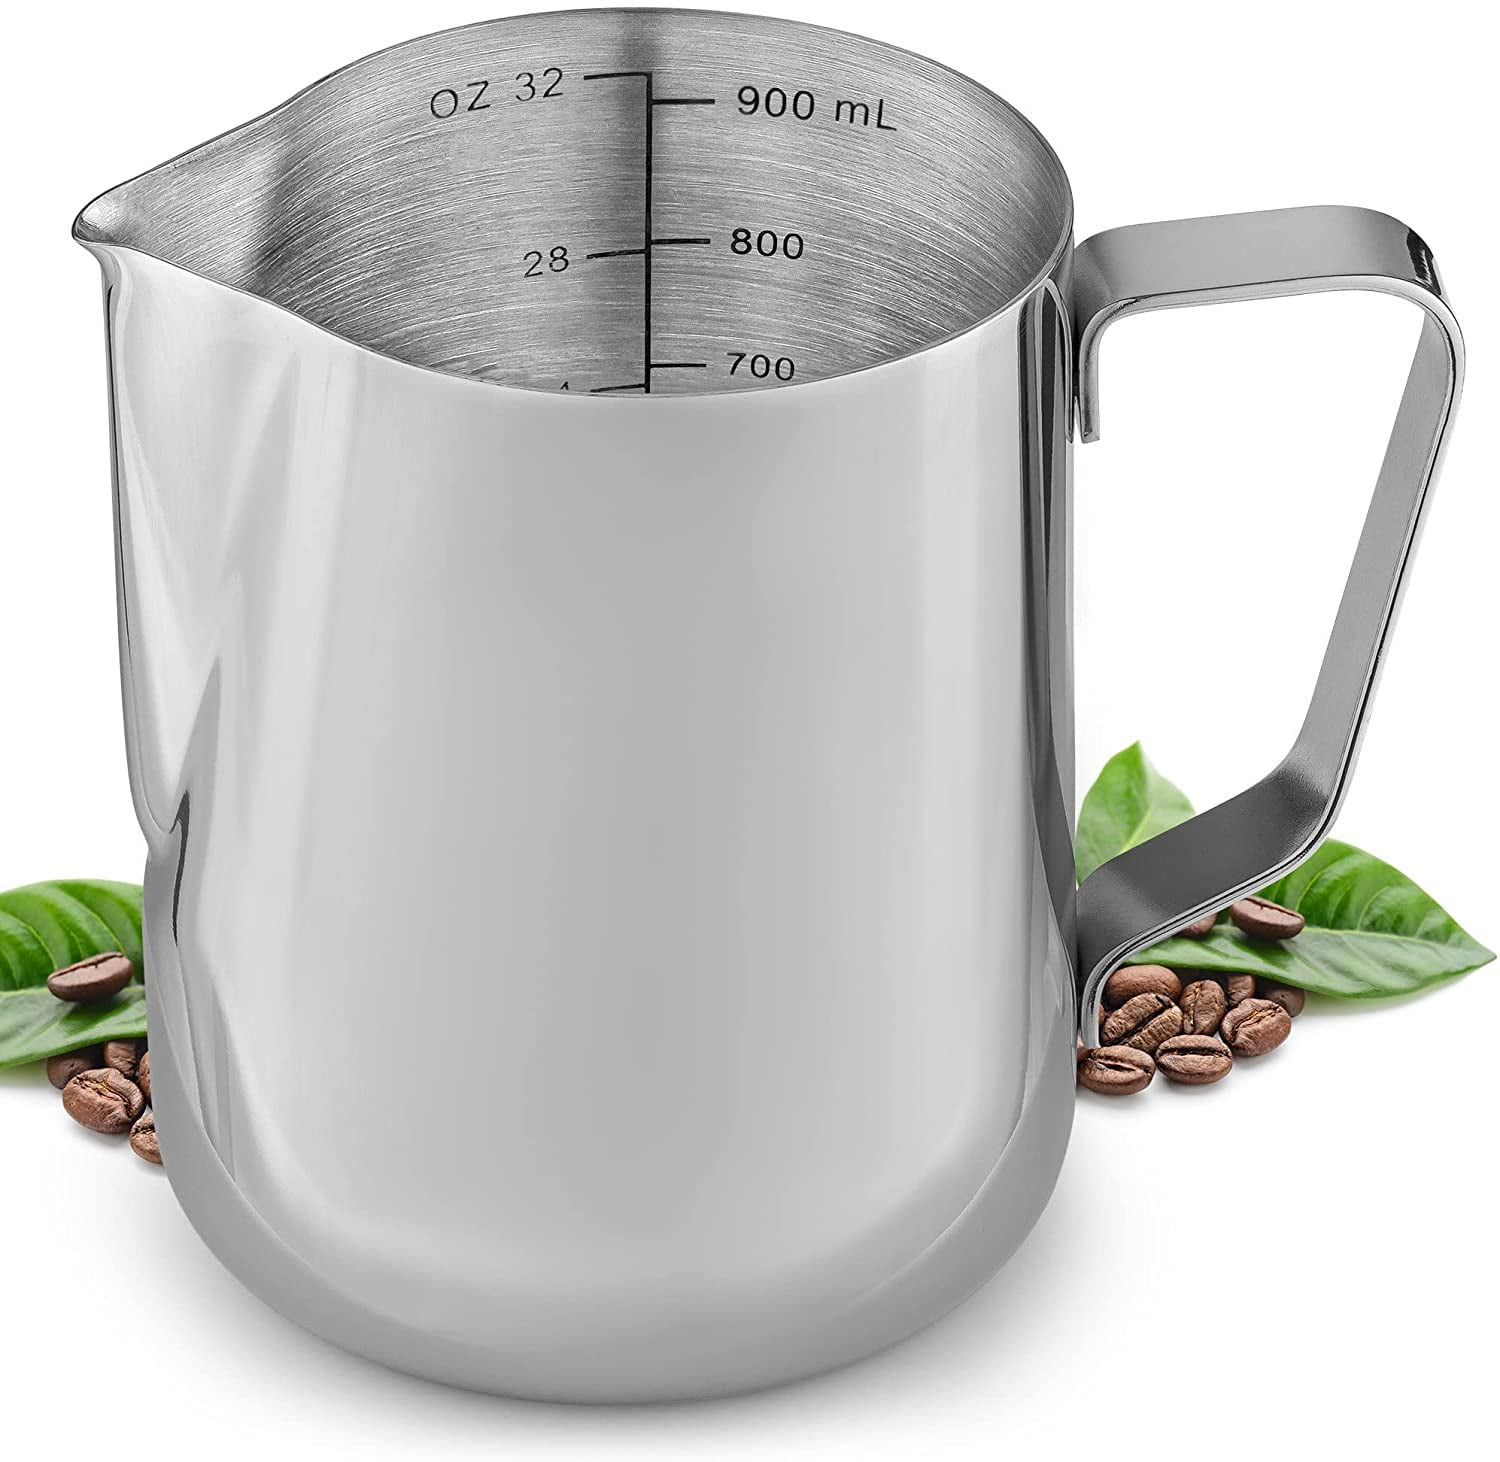 Zulay Kitchen 12oz Stainless Steel Milk Frothing Pitcher - Milk Frother Cup  - Easy-to-Clean Espresso Accessories - Easy-to-Read Creamer Measurements 